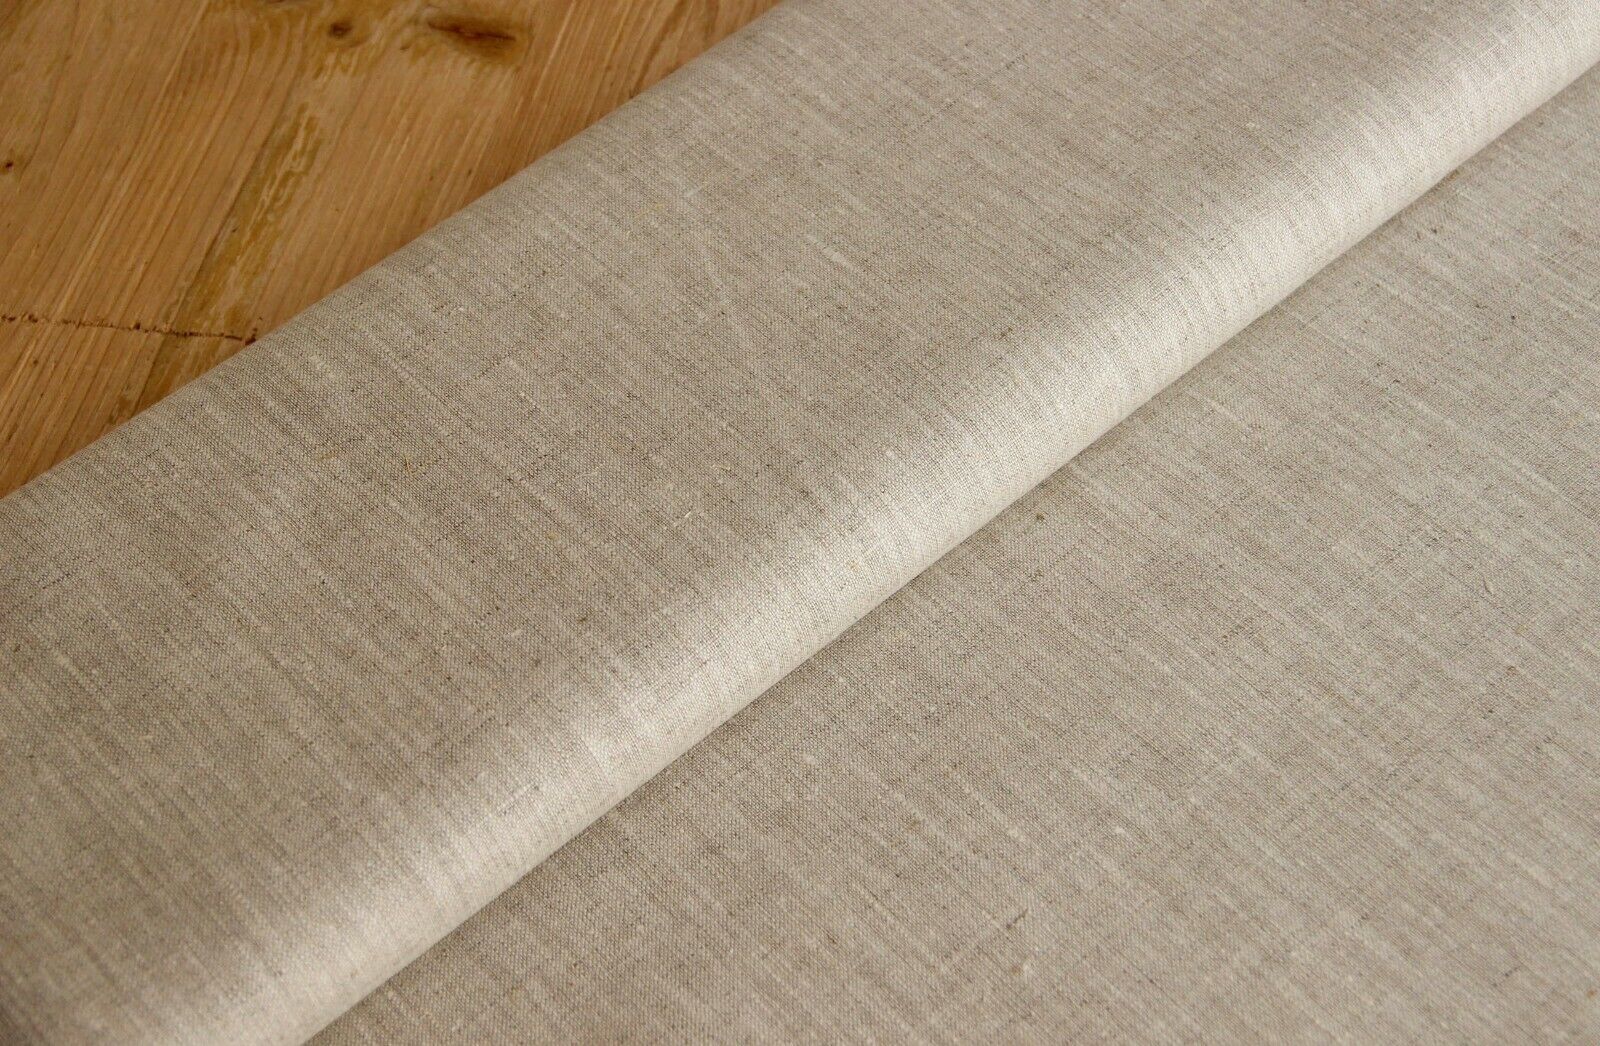 Linen Rustic - sold by the meter NATURAL fabric bleached 100% linen * 50 cm x 145 cm